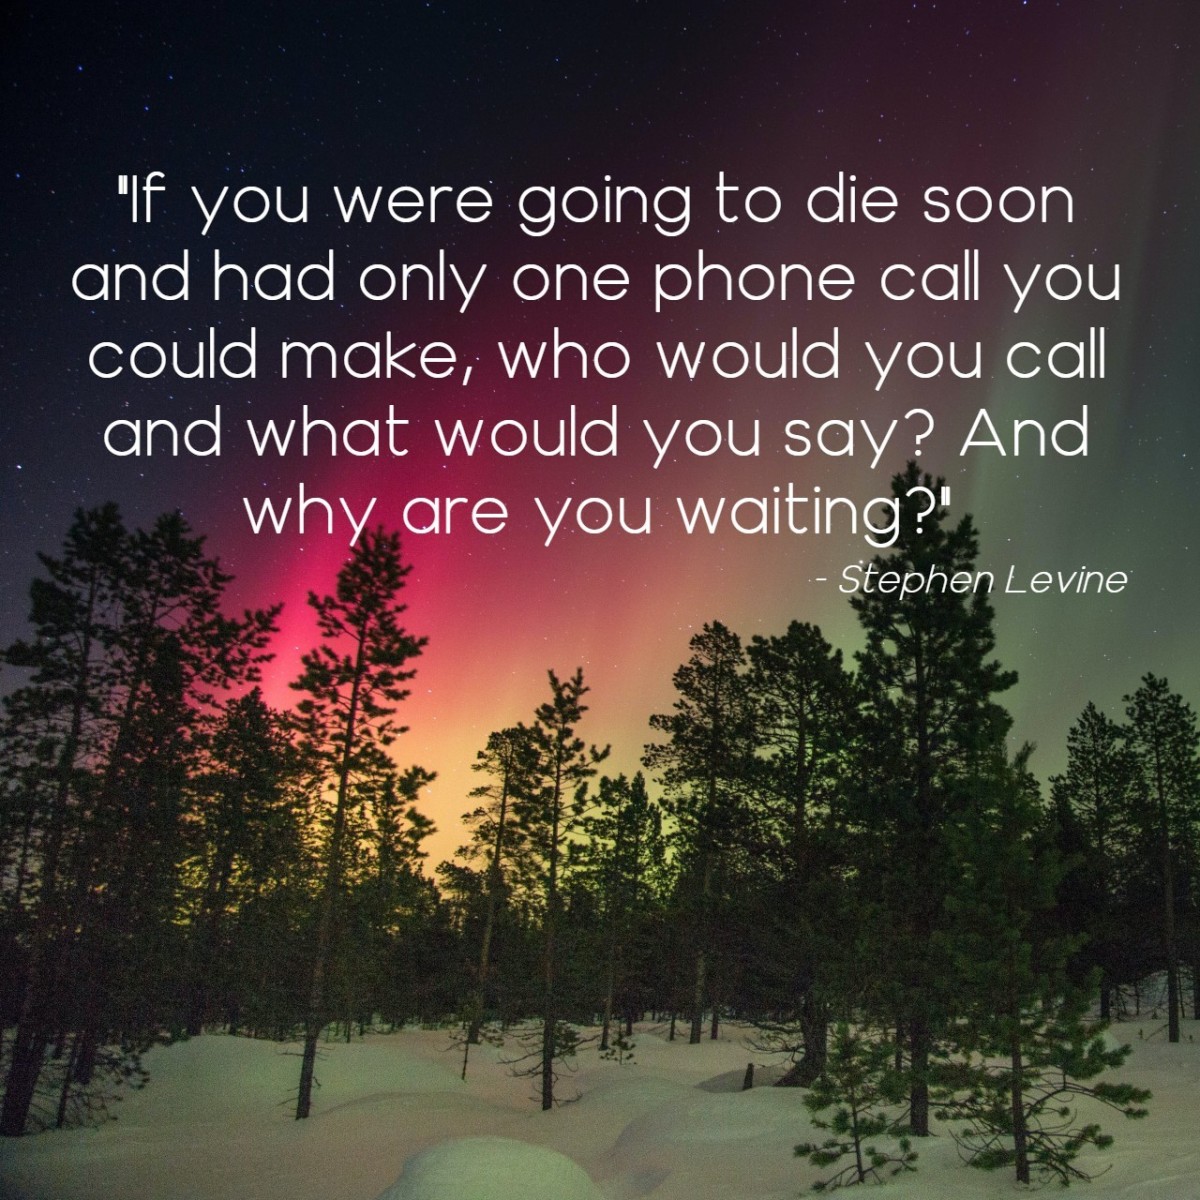 "If you were going to die soon and had only one phone call you could make, who would you call and what would you say? And why are you waiting?" - Stephen Levine, American author